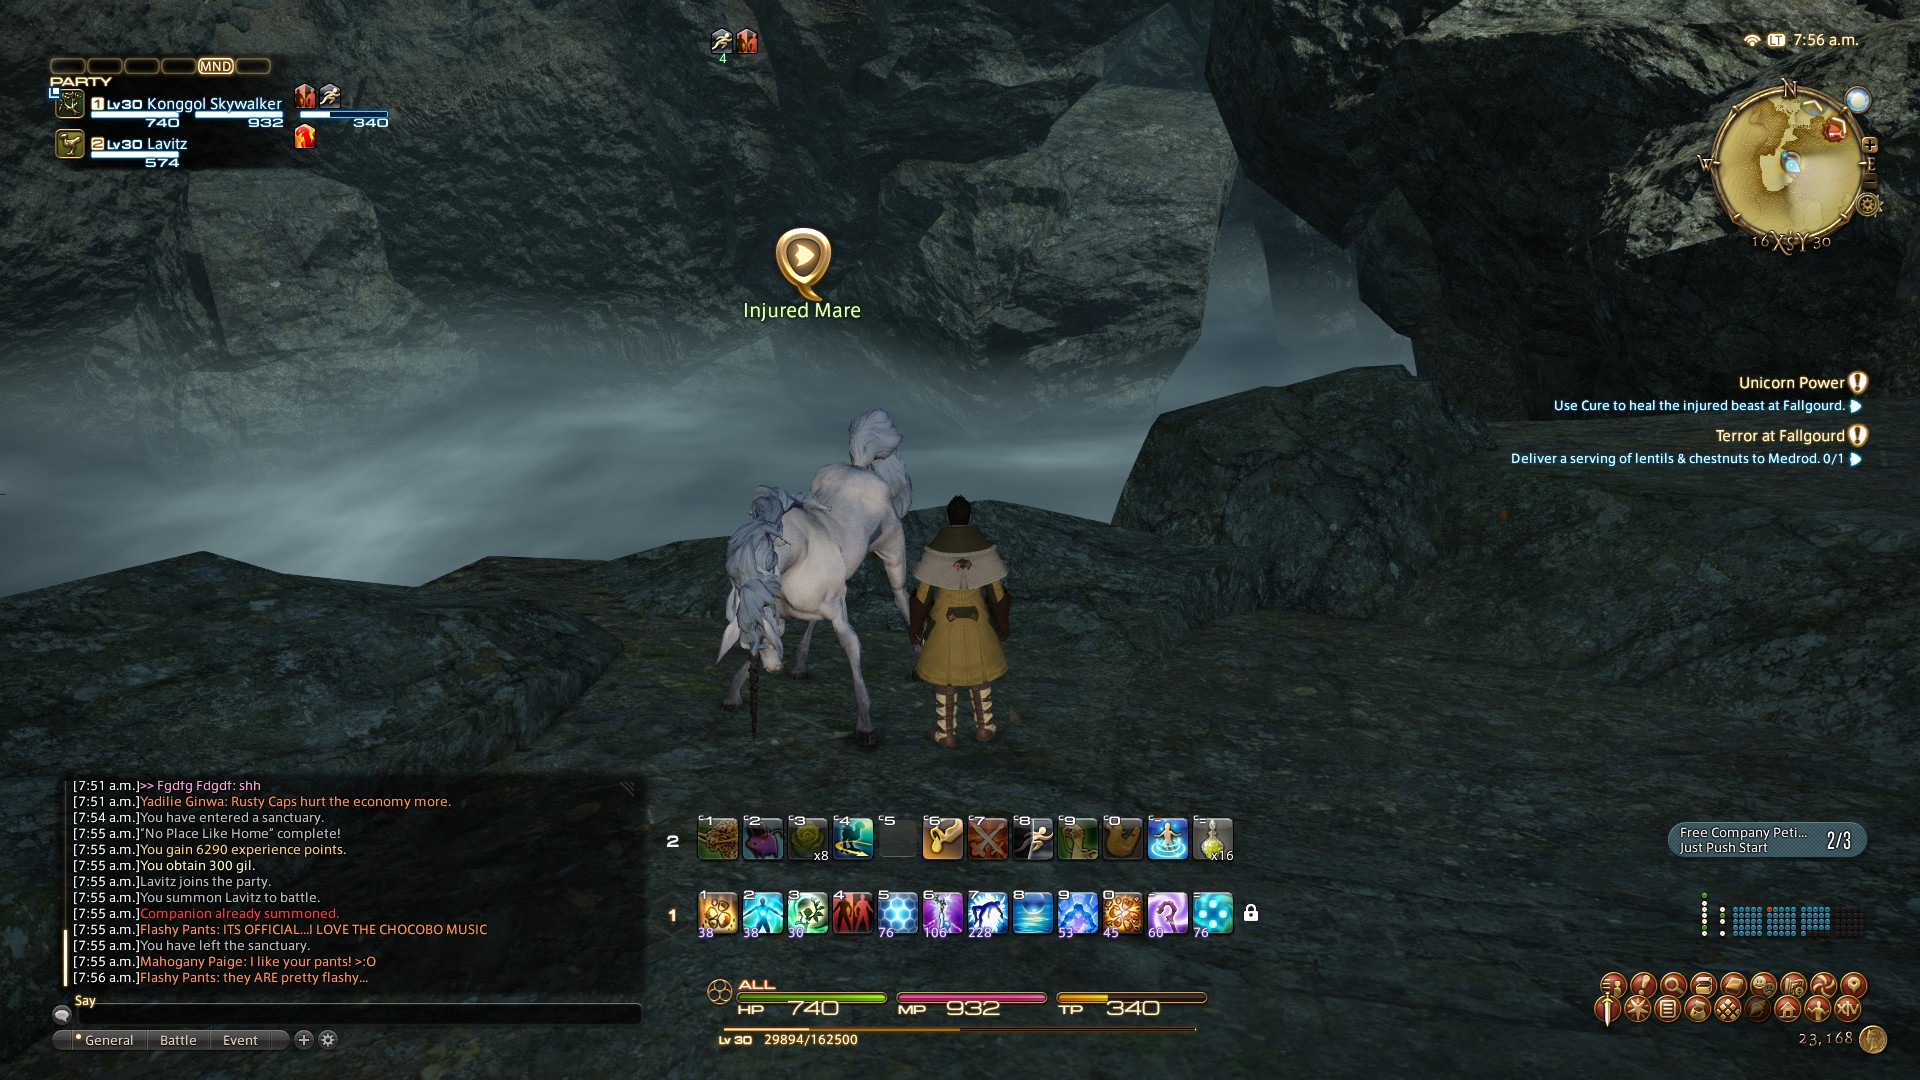 Player standing on the corner with a horse, game health and specifications shown 